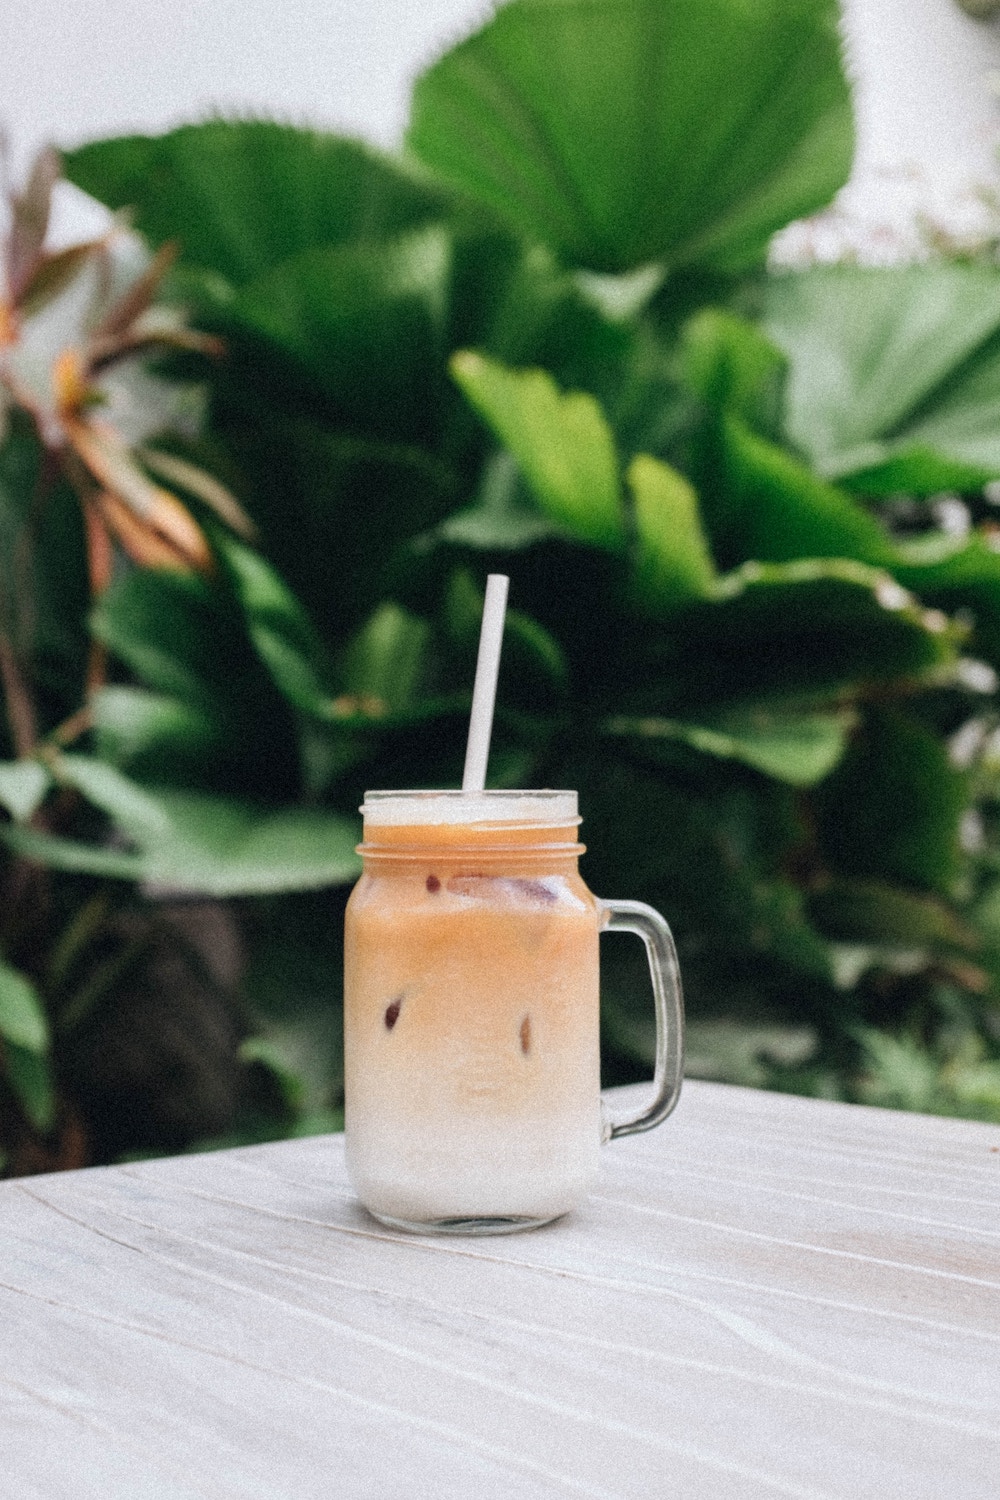 Iced Coffee Vs. Cold Brew: What is the Difference?